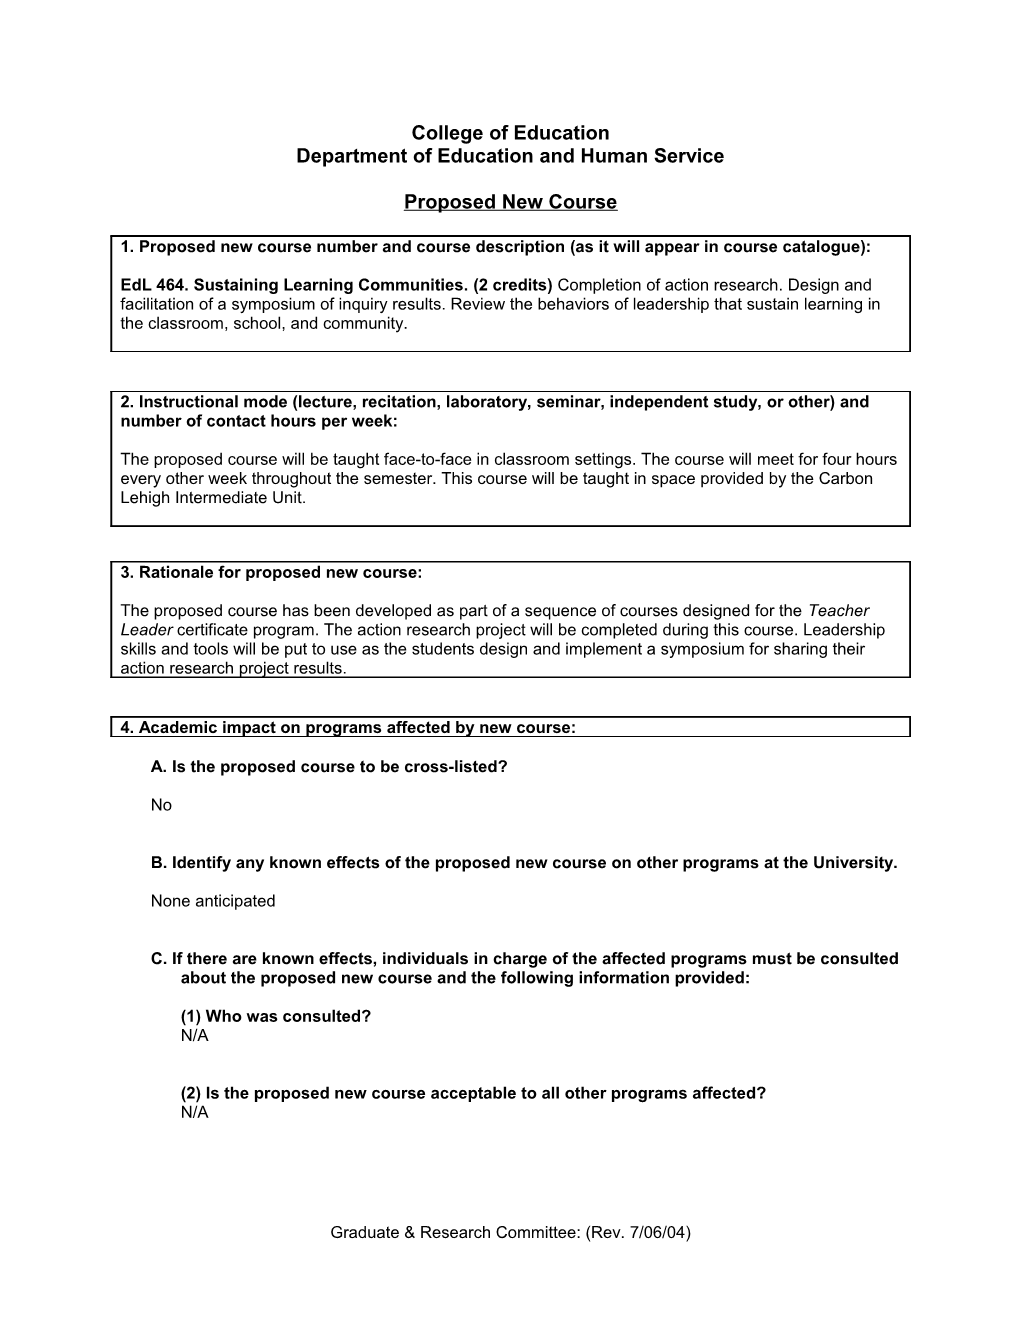 GRC New Course Proposal Form